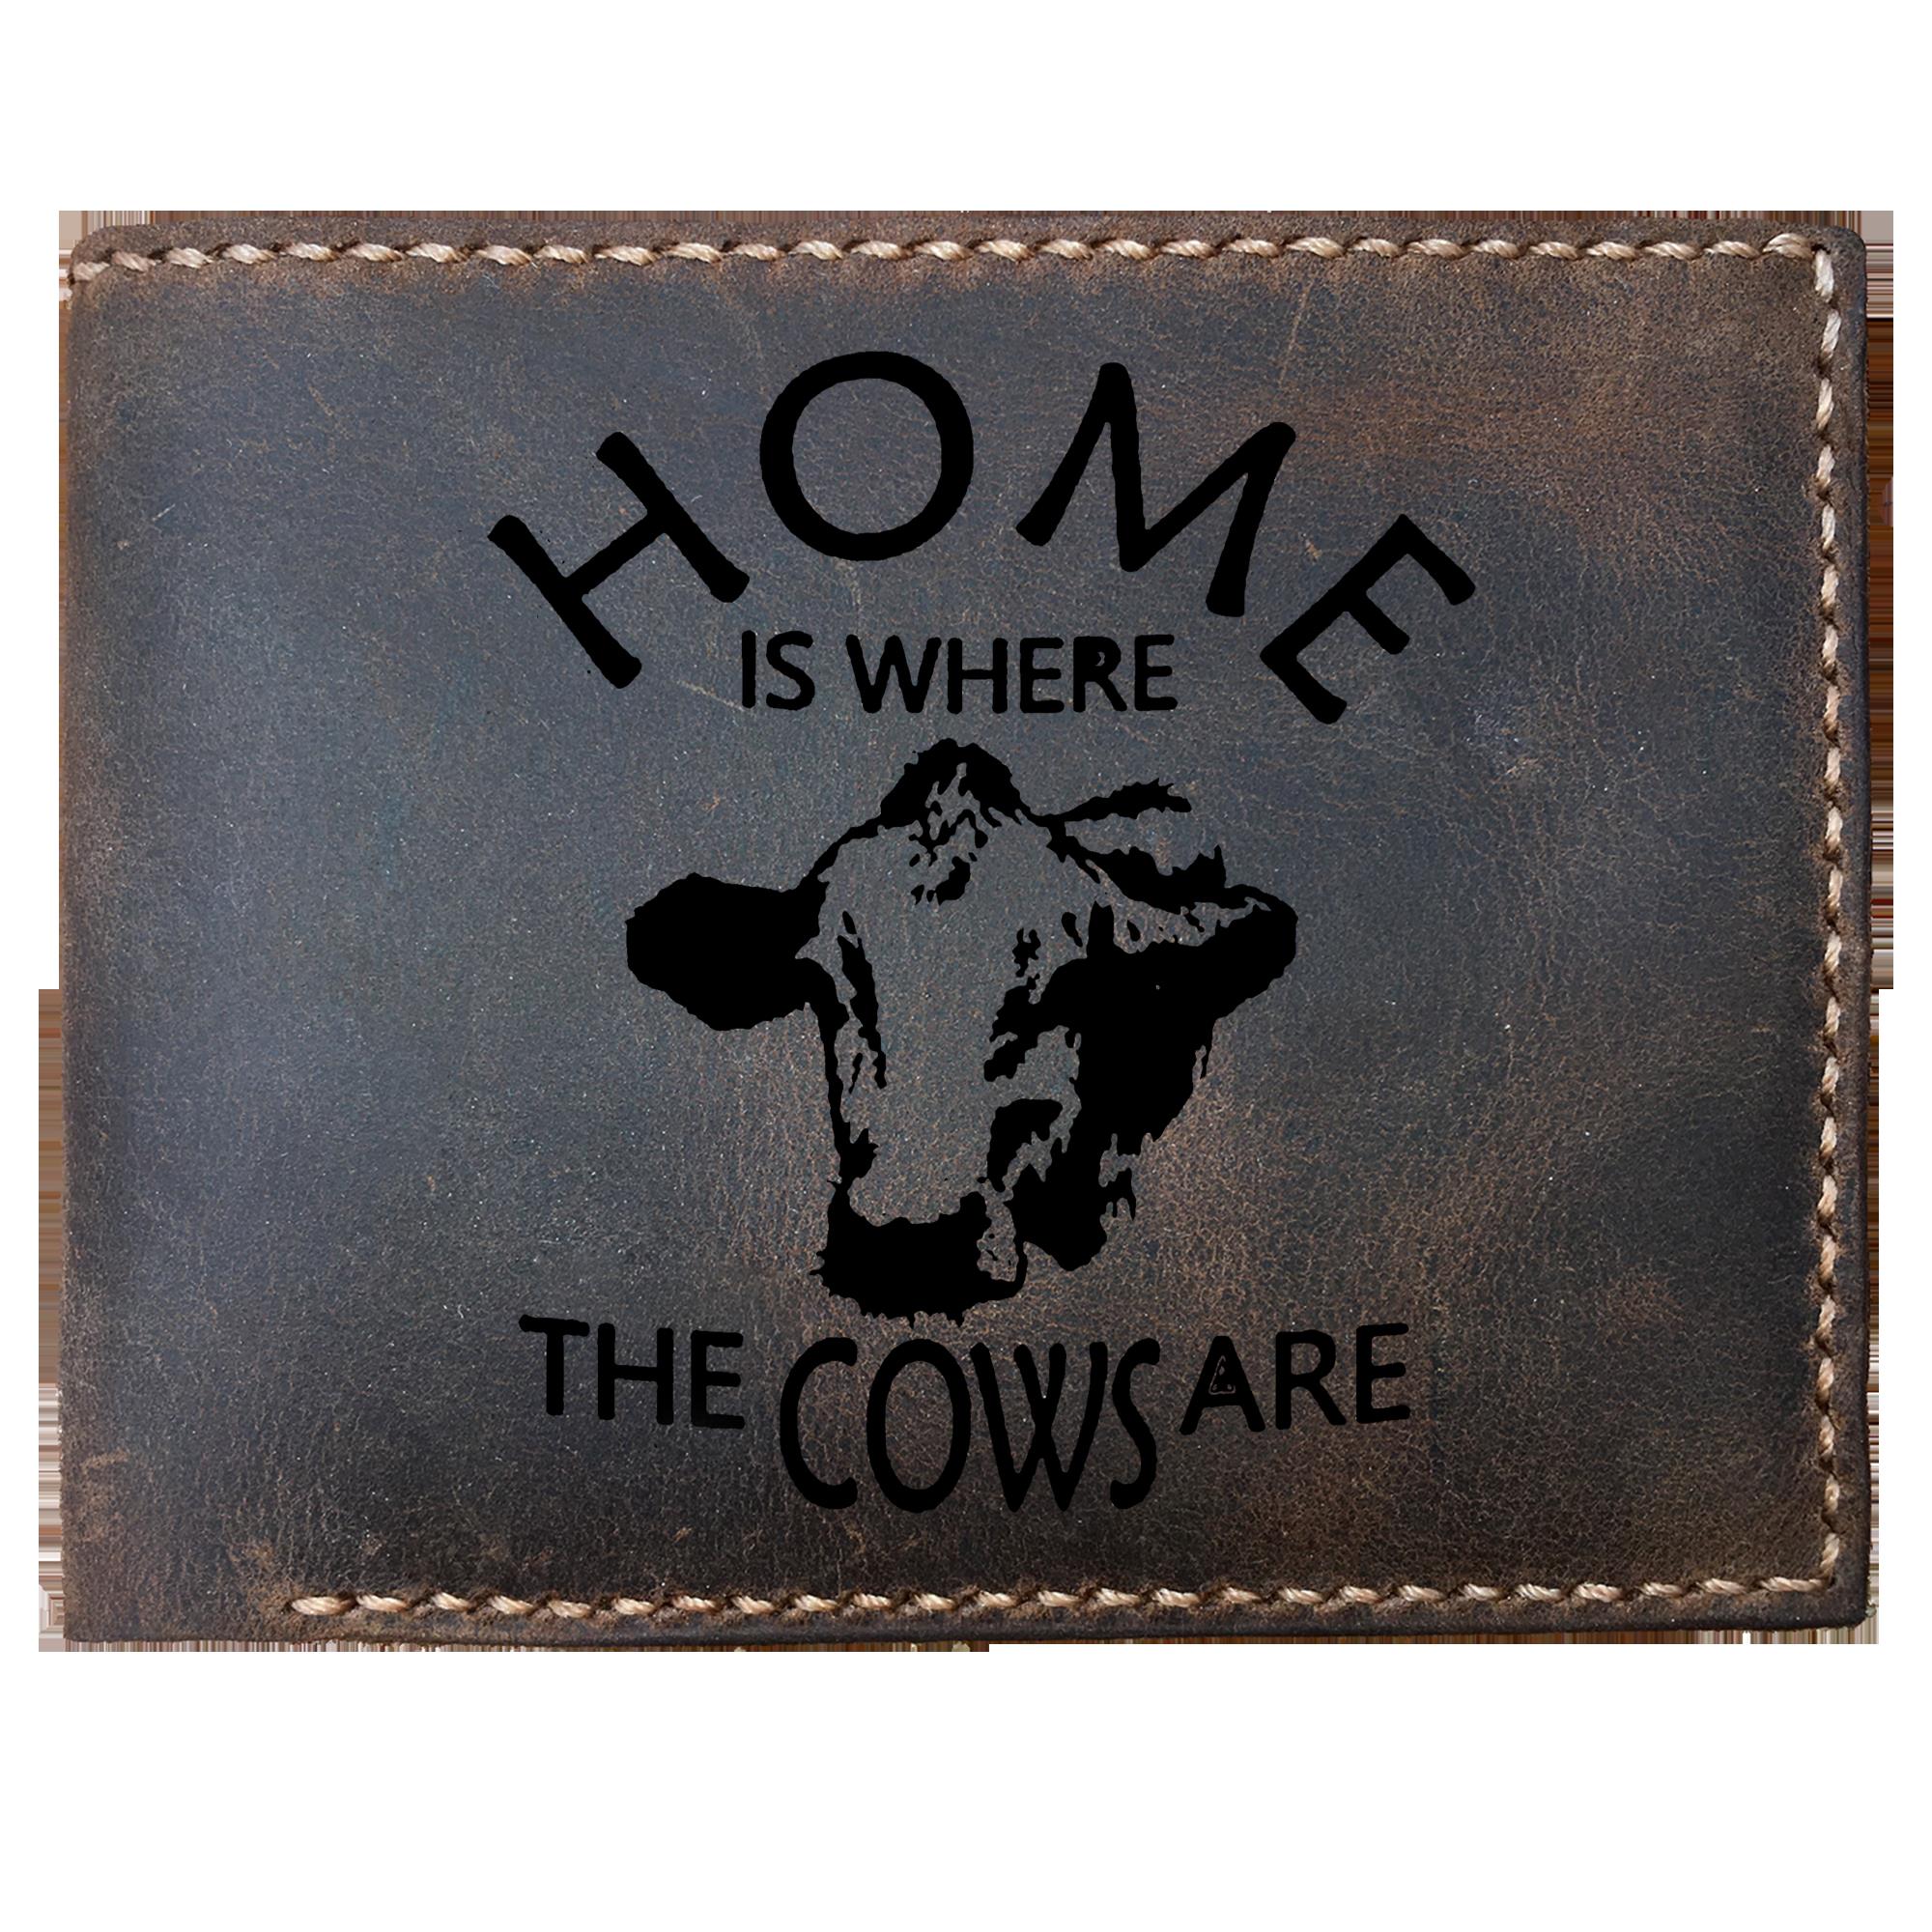 Skitongifts Funny Custom Laser Engraved Bifold Leather Wallet For Men, Home Is Where The Cows Are